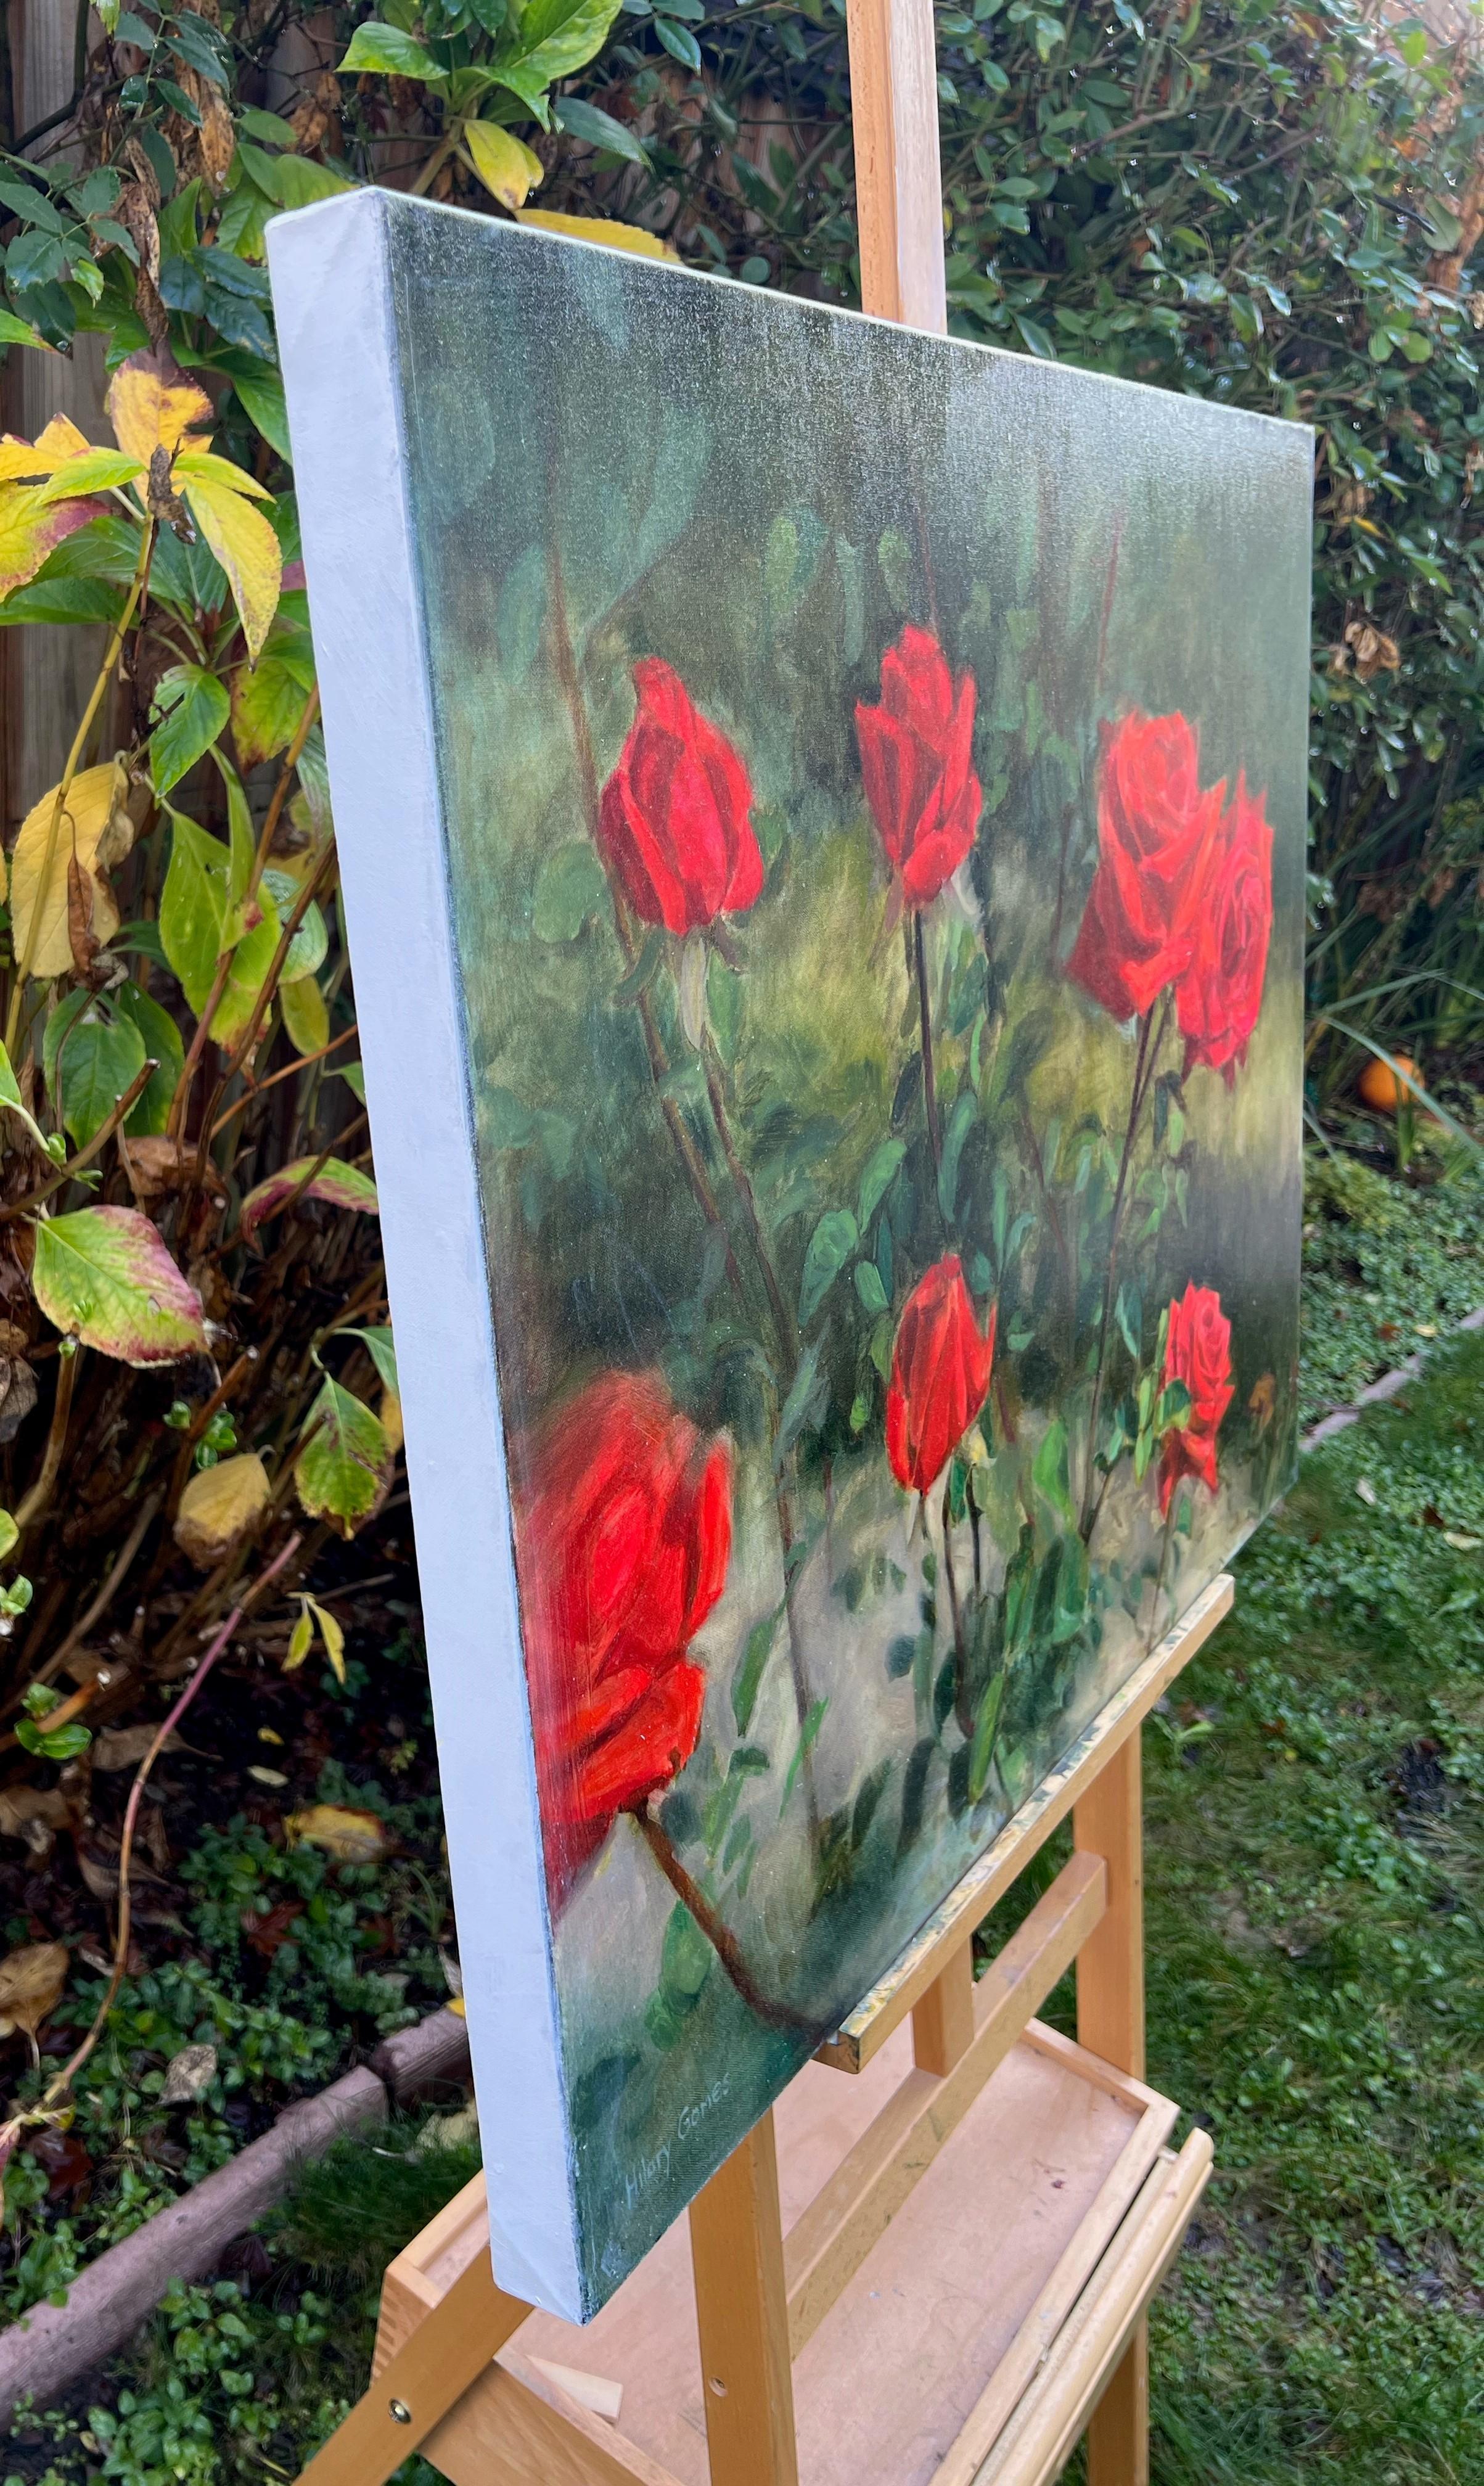 <p>Artist Comments<br>Seven red roses delicately cling to their slender stems and sparse bush. The bright sunlight illuminates their vivid presence, imbuing the garden scene with a classical and timeless charm. The grisaille underpainting and the